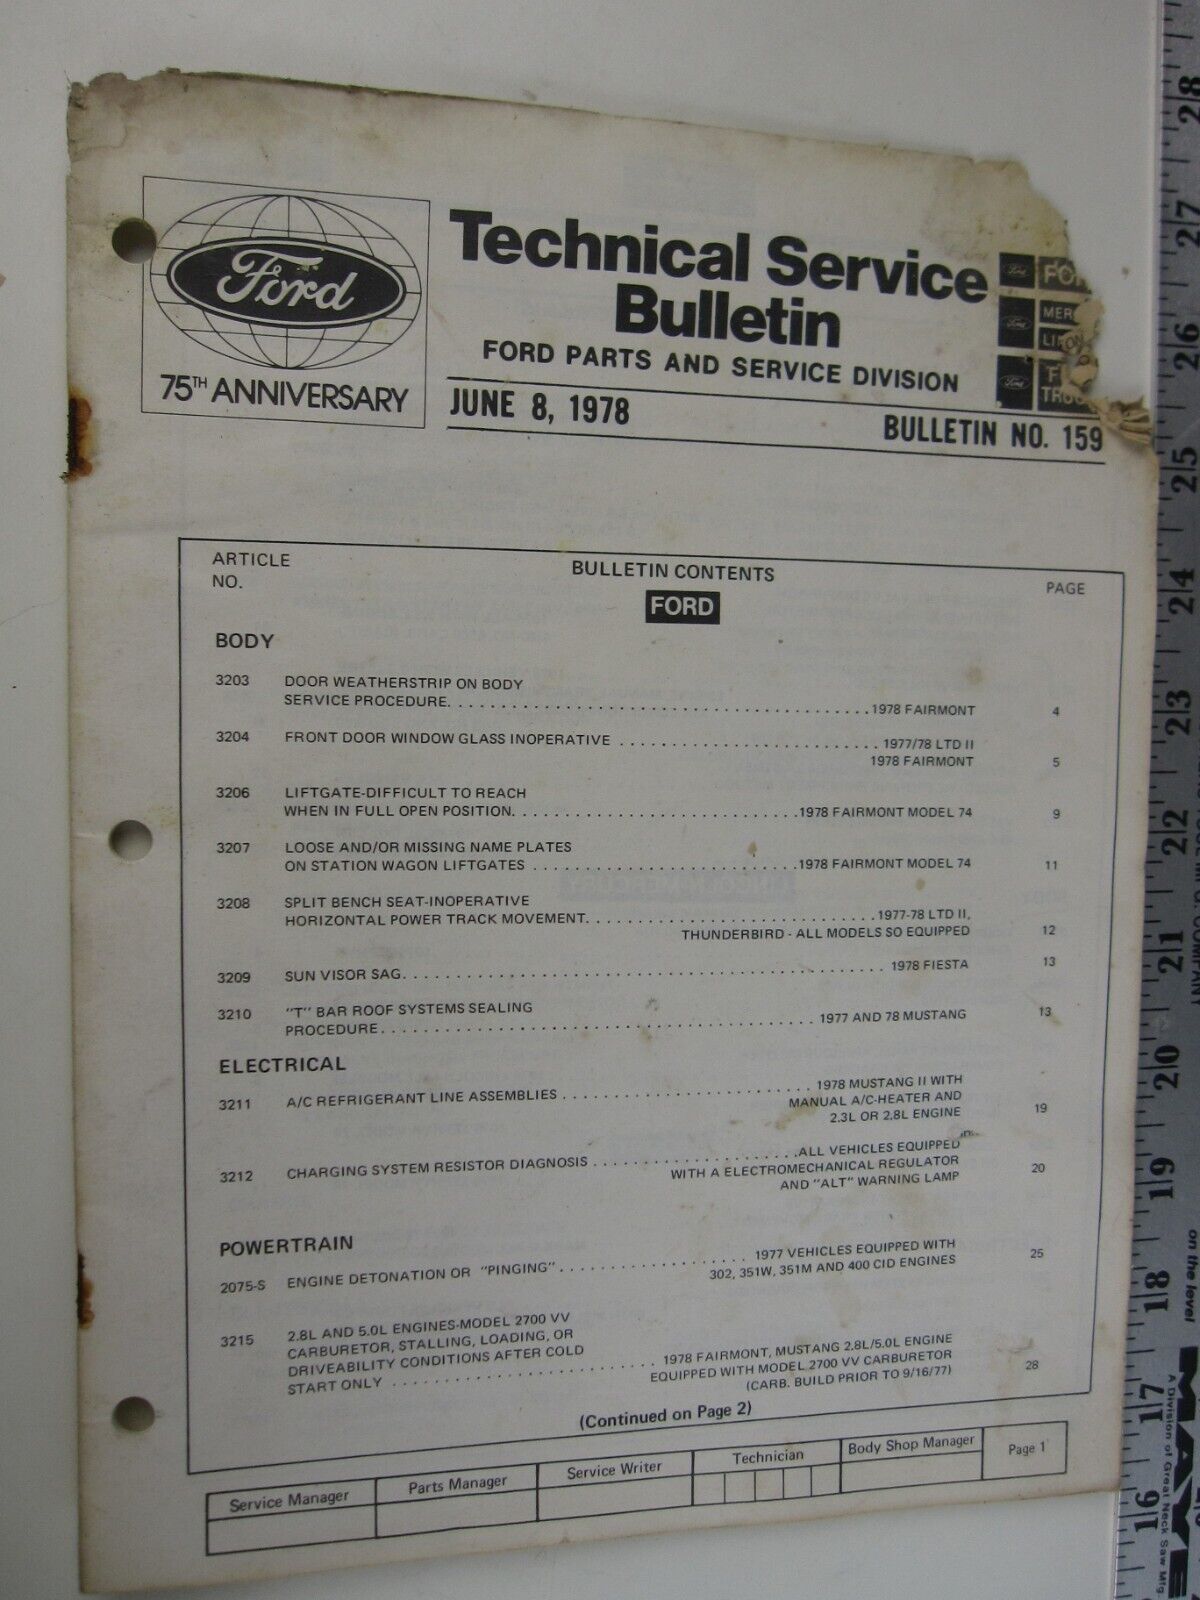 June 8, 1978 FORD Technical Service Bulletin Number 159  BIS